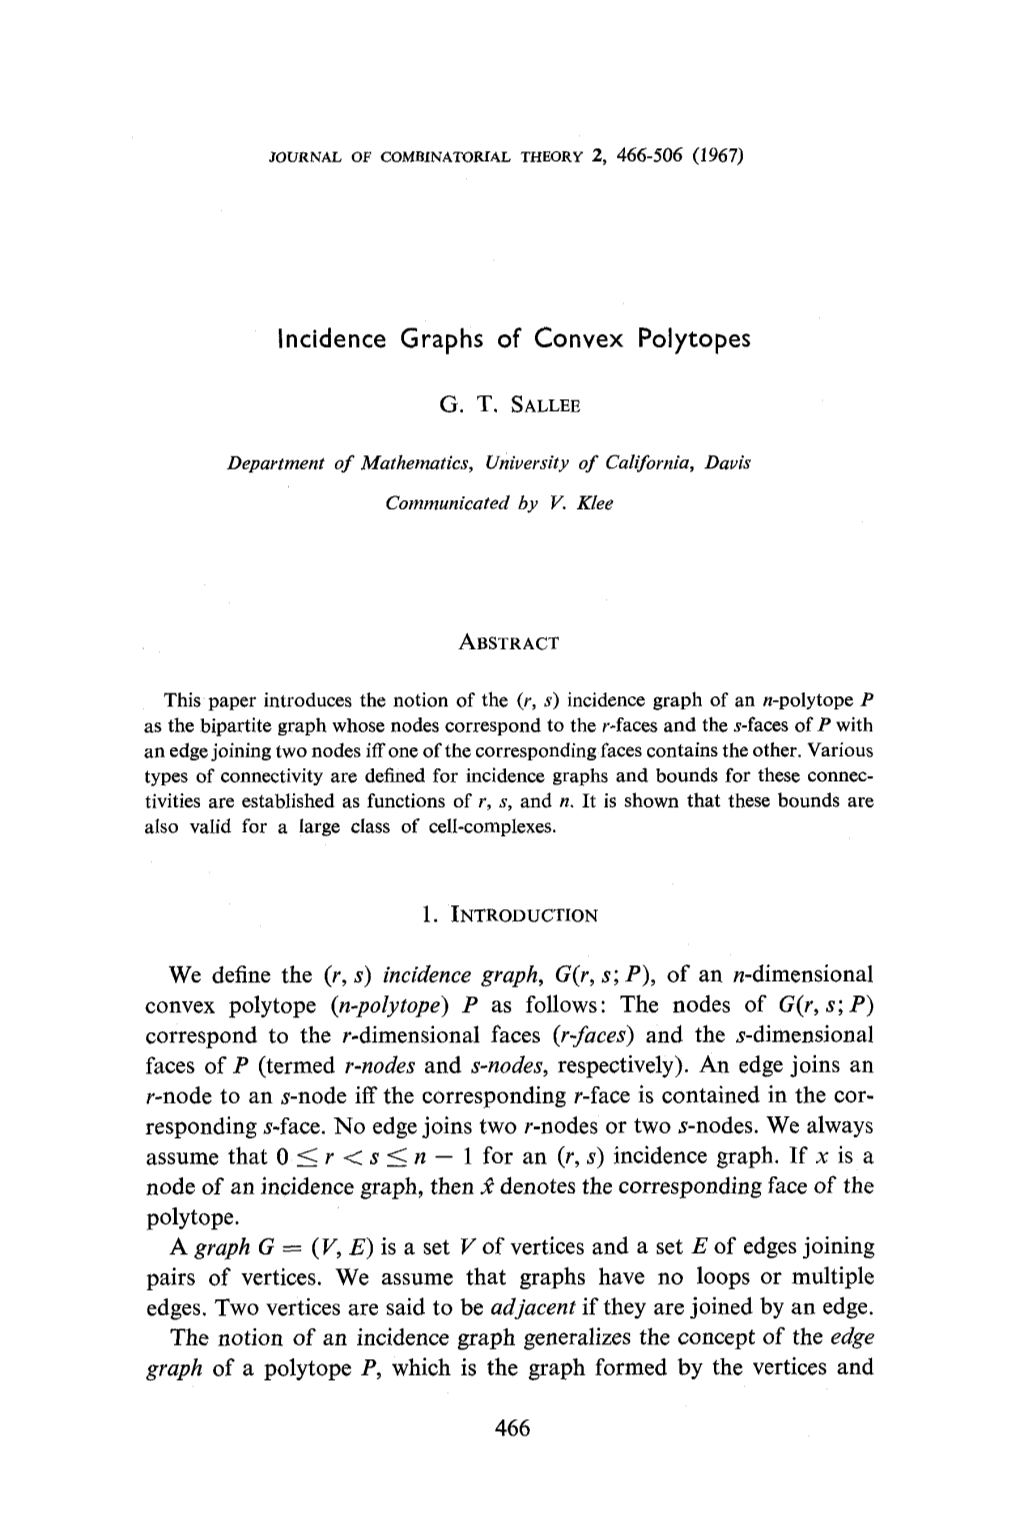 Incidence Graphs of Convex Polytopes